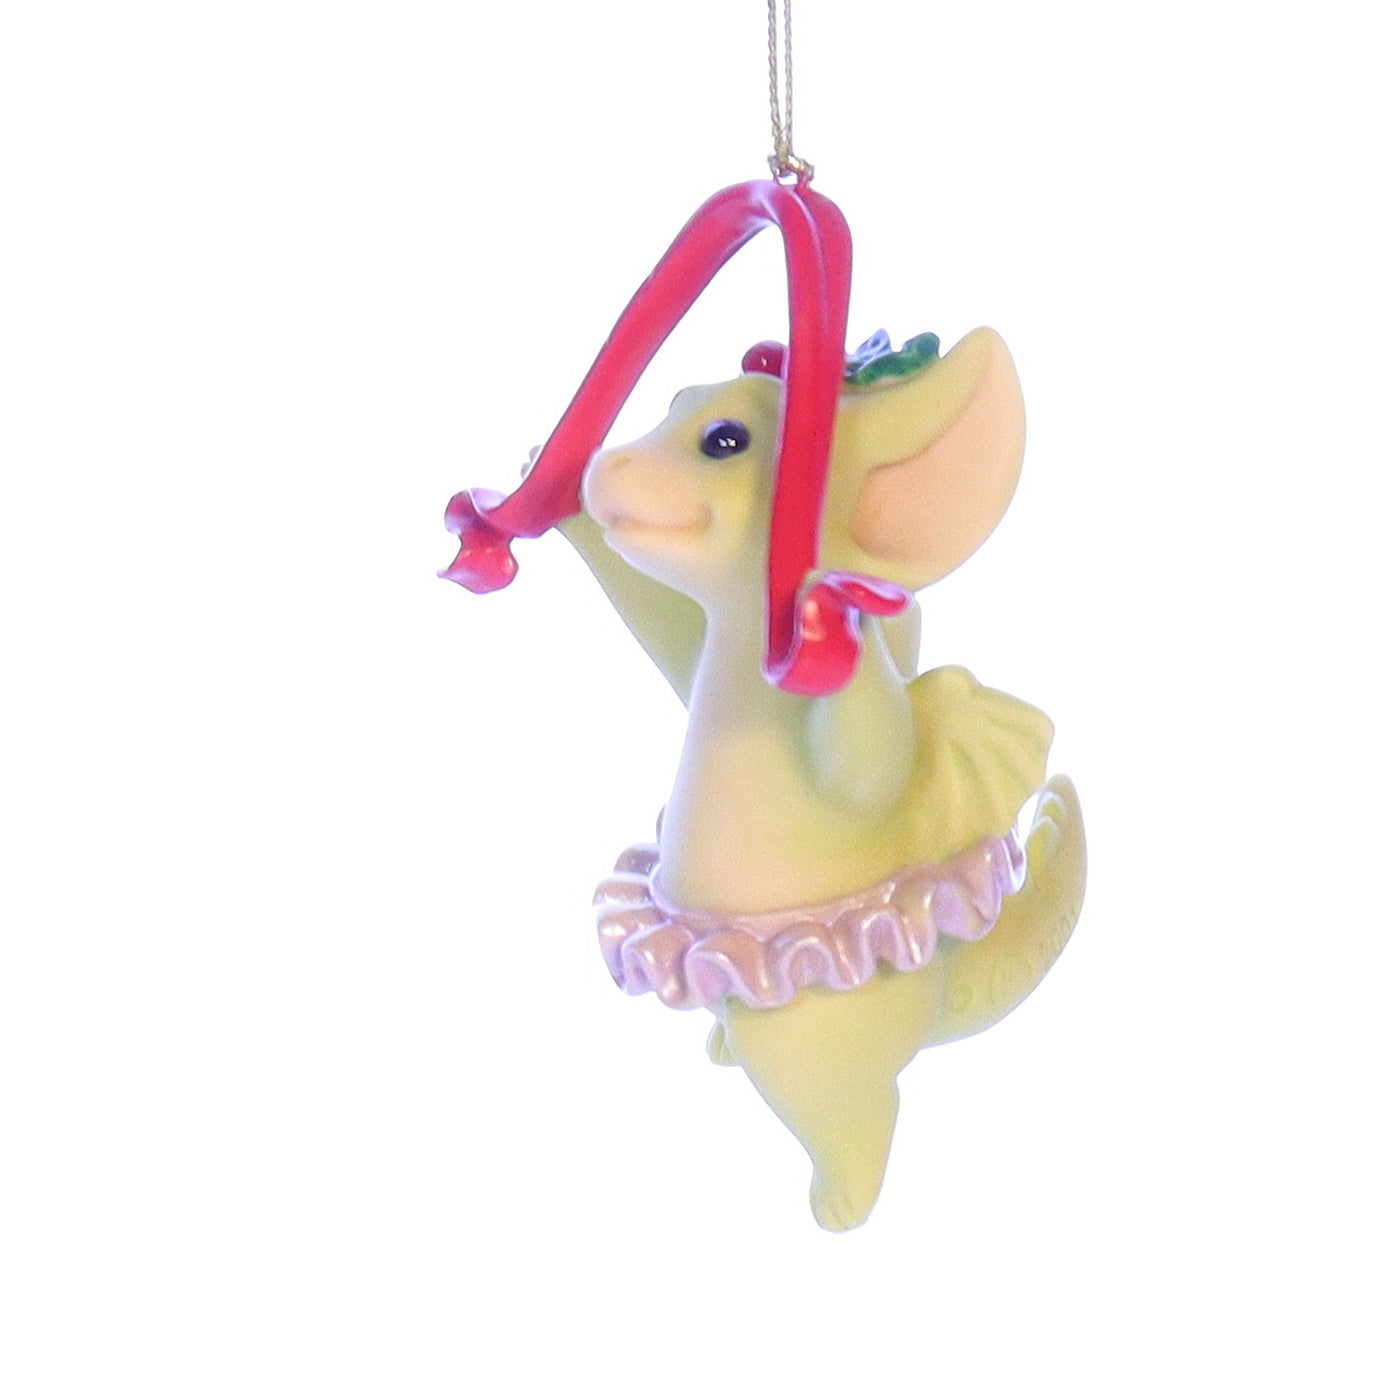 Whimsical_World_of_Pocket_Dragons_013847_Sugar_Plum_Fairy_Ballet_Figurine_2001_Box Front Left View